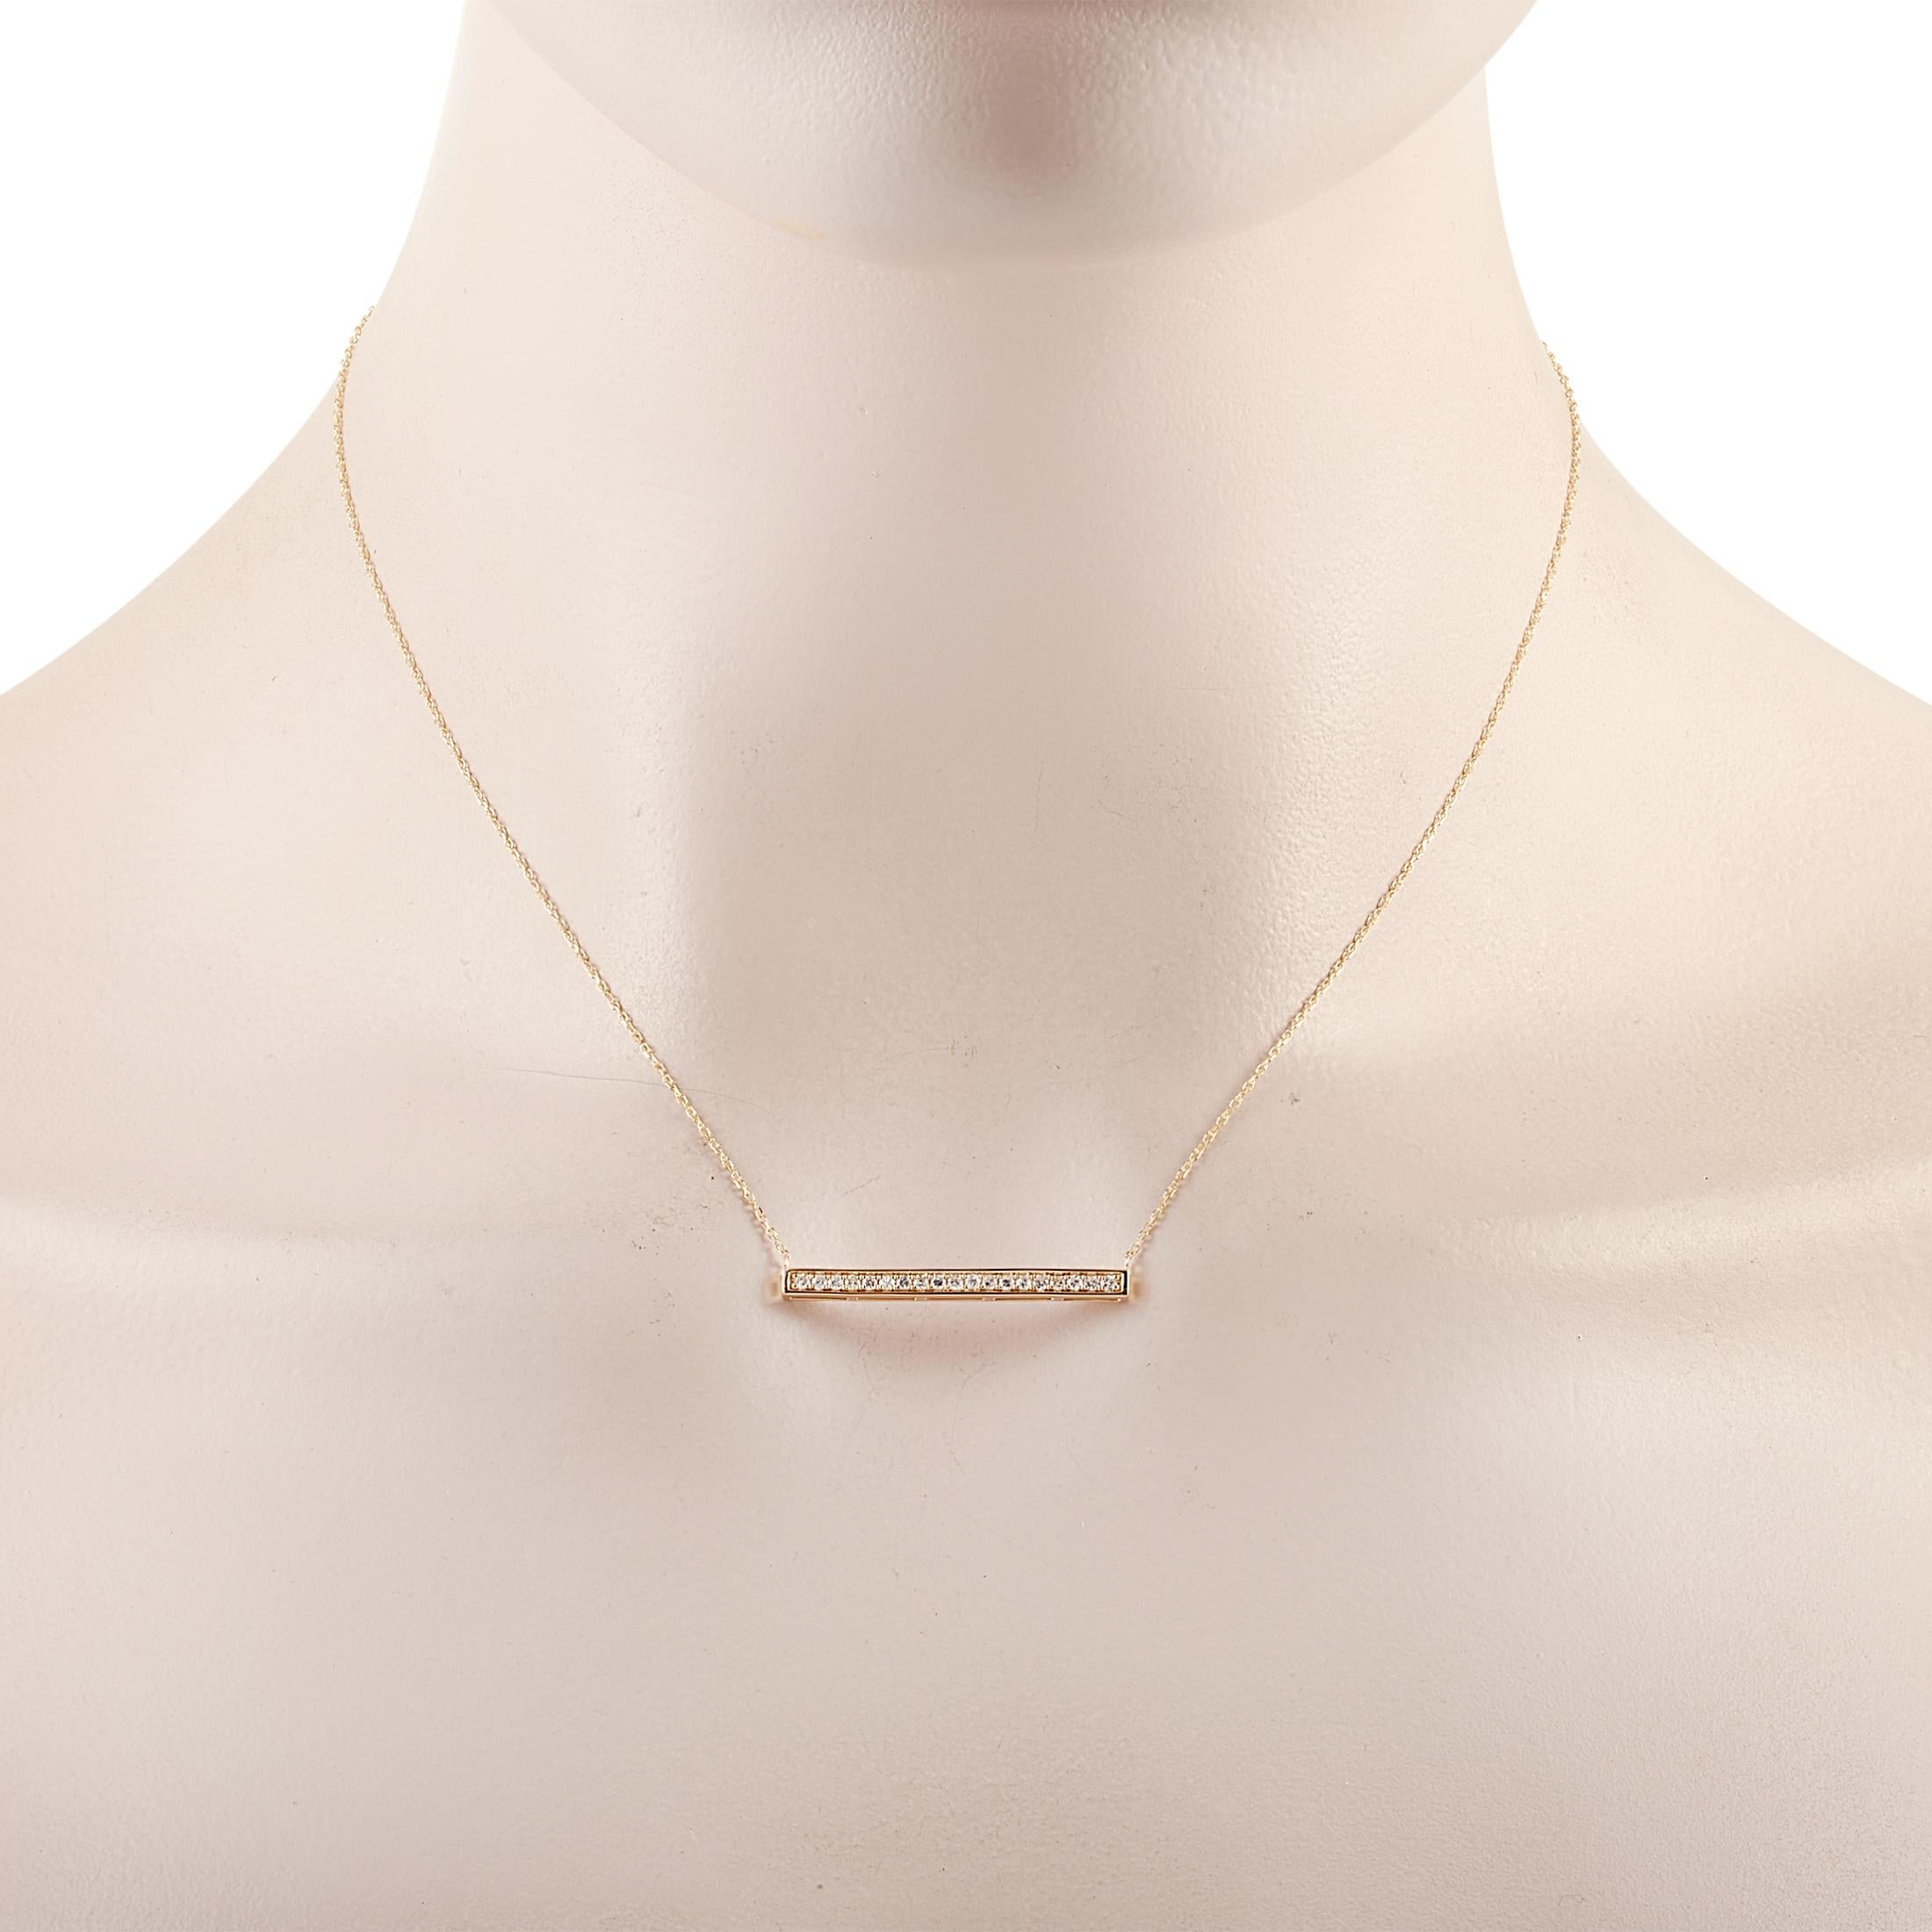 This LB Exclusive necklace is crafted from 14K yellow gold and weighs 2.1 grams. It is presented with a 15” chain and boasts a pendant that measures 0.13” in length and 1.25” in width. The necklace is set with diamonds that total 0.25 carats.
 
